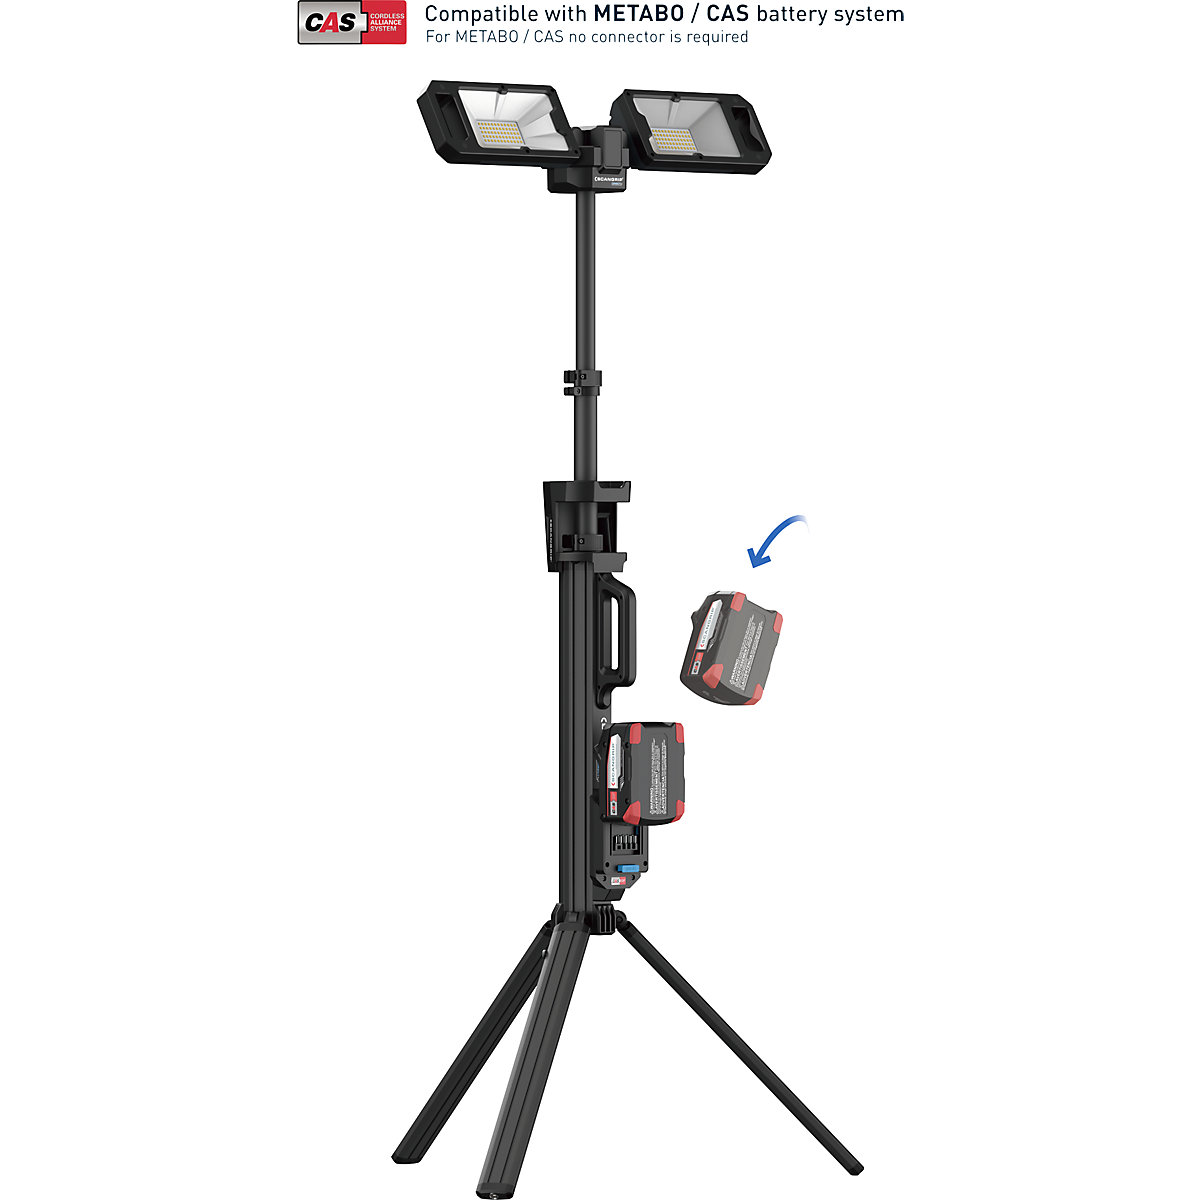 TOWER 5 CONNECT LED floodlight – SCANGRIP (Product illustration 14)-13